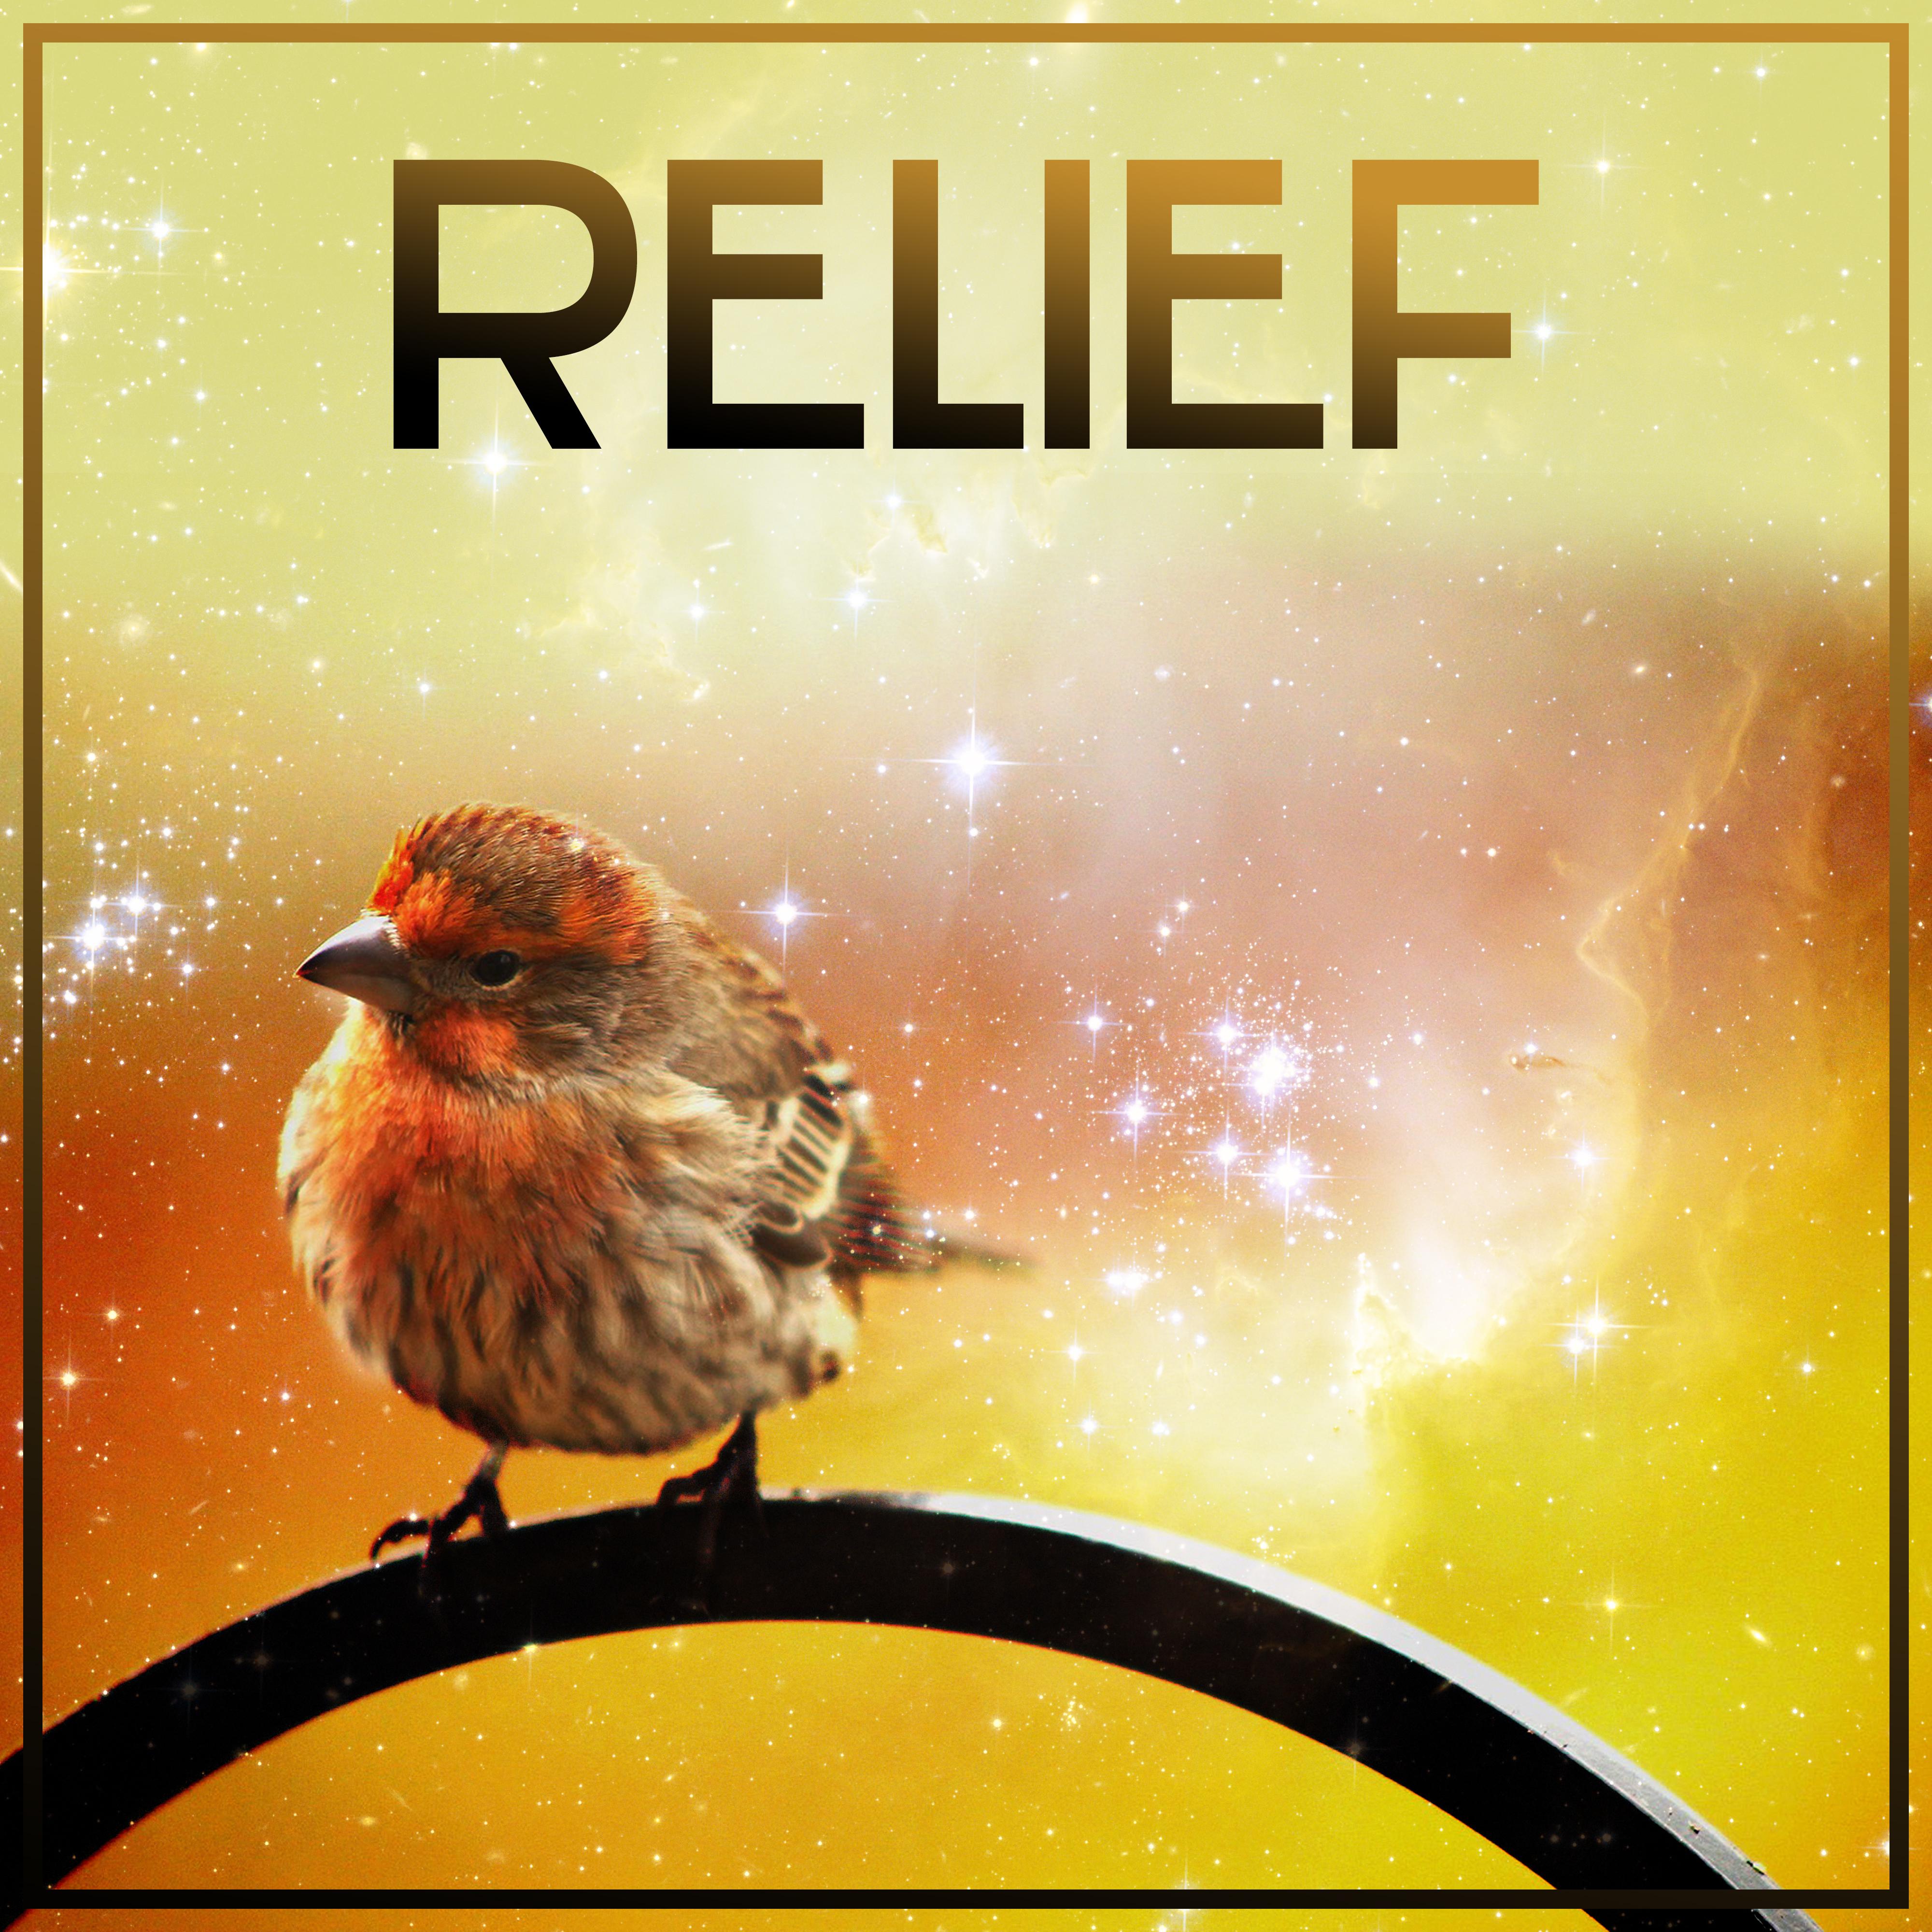 Relief  Nature Sounds for Relaxation, Deep Sleep, Stress Free, Healing Water, Relaxing Waves, Sounds of Sea, Rest, Peaceful Mind